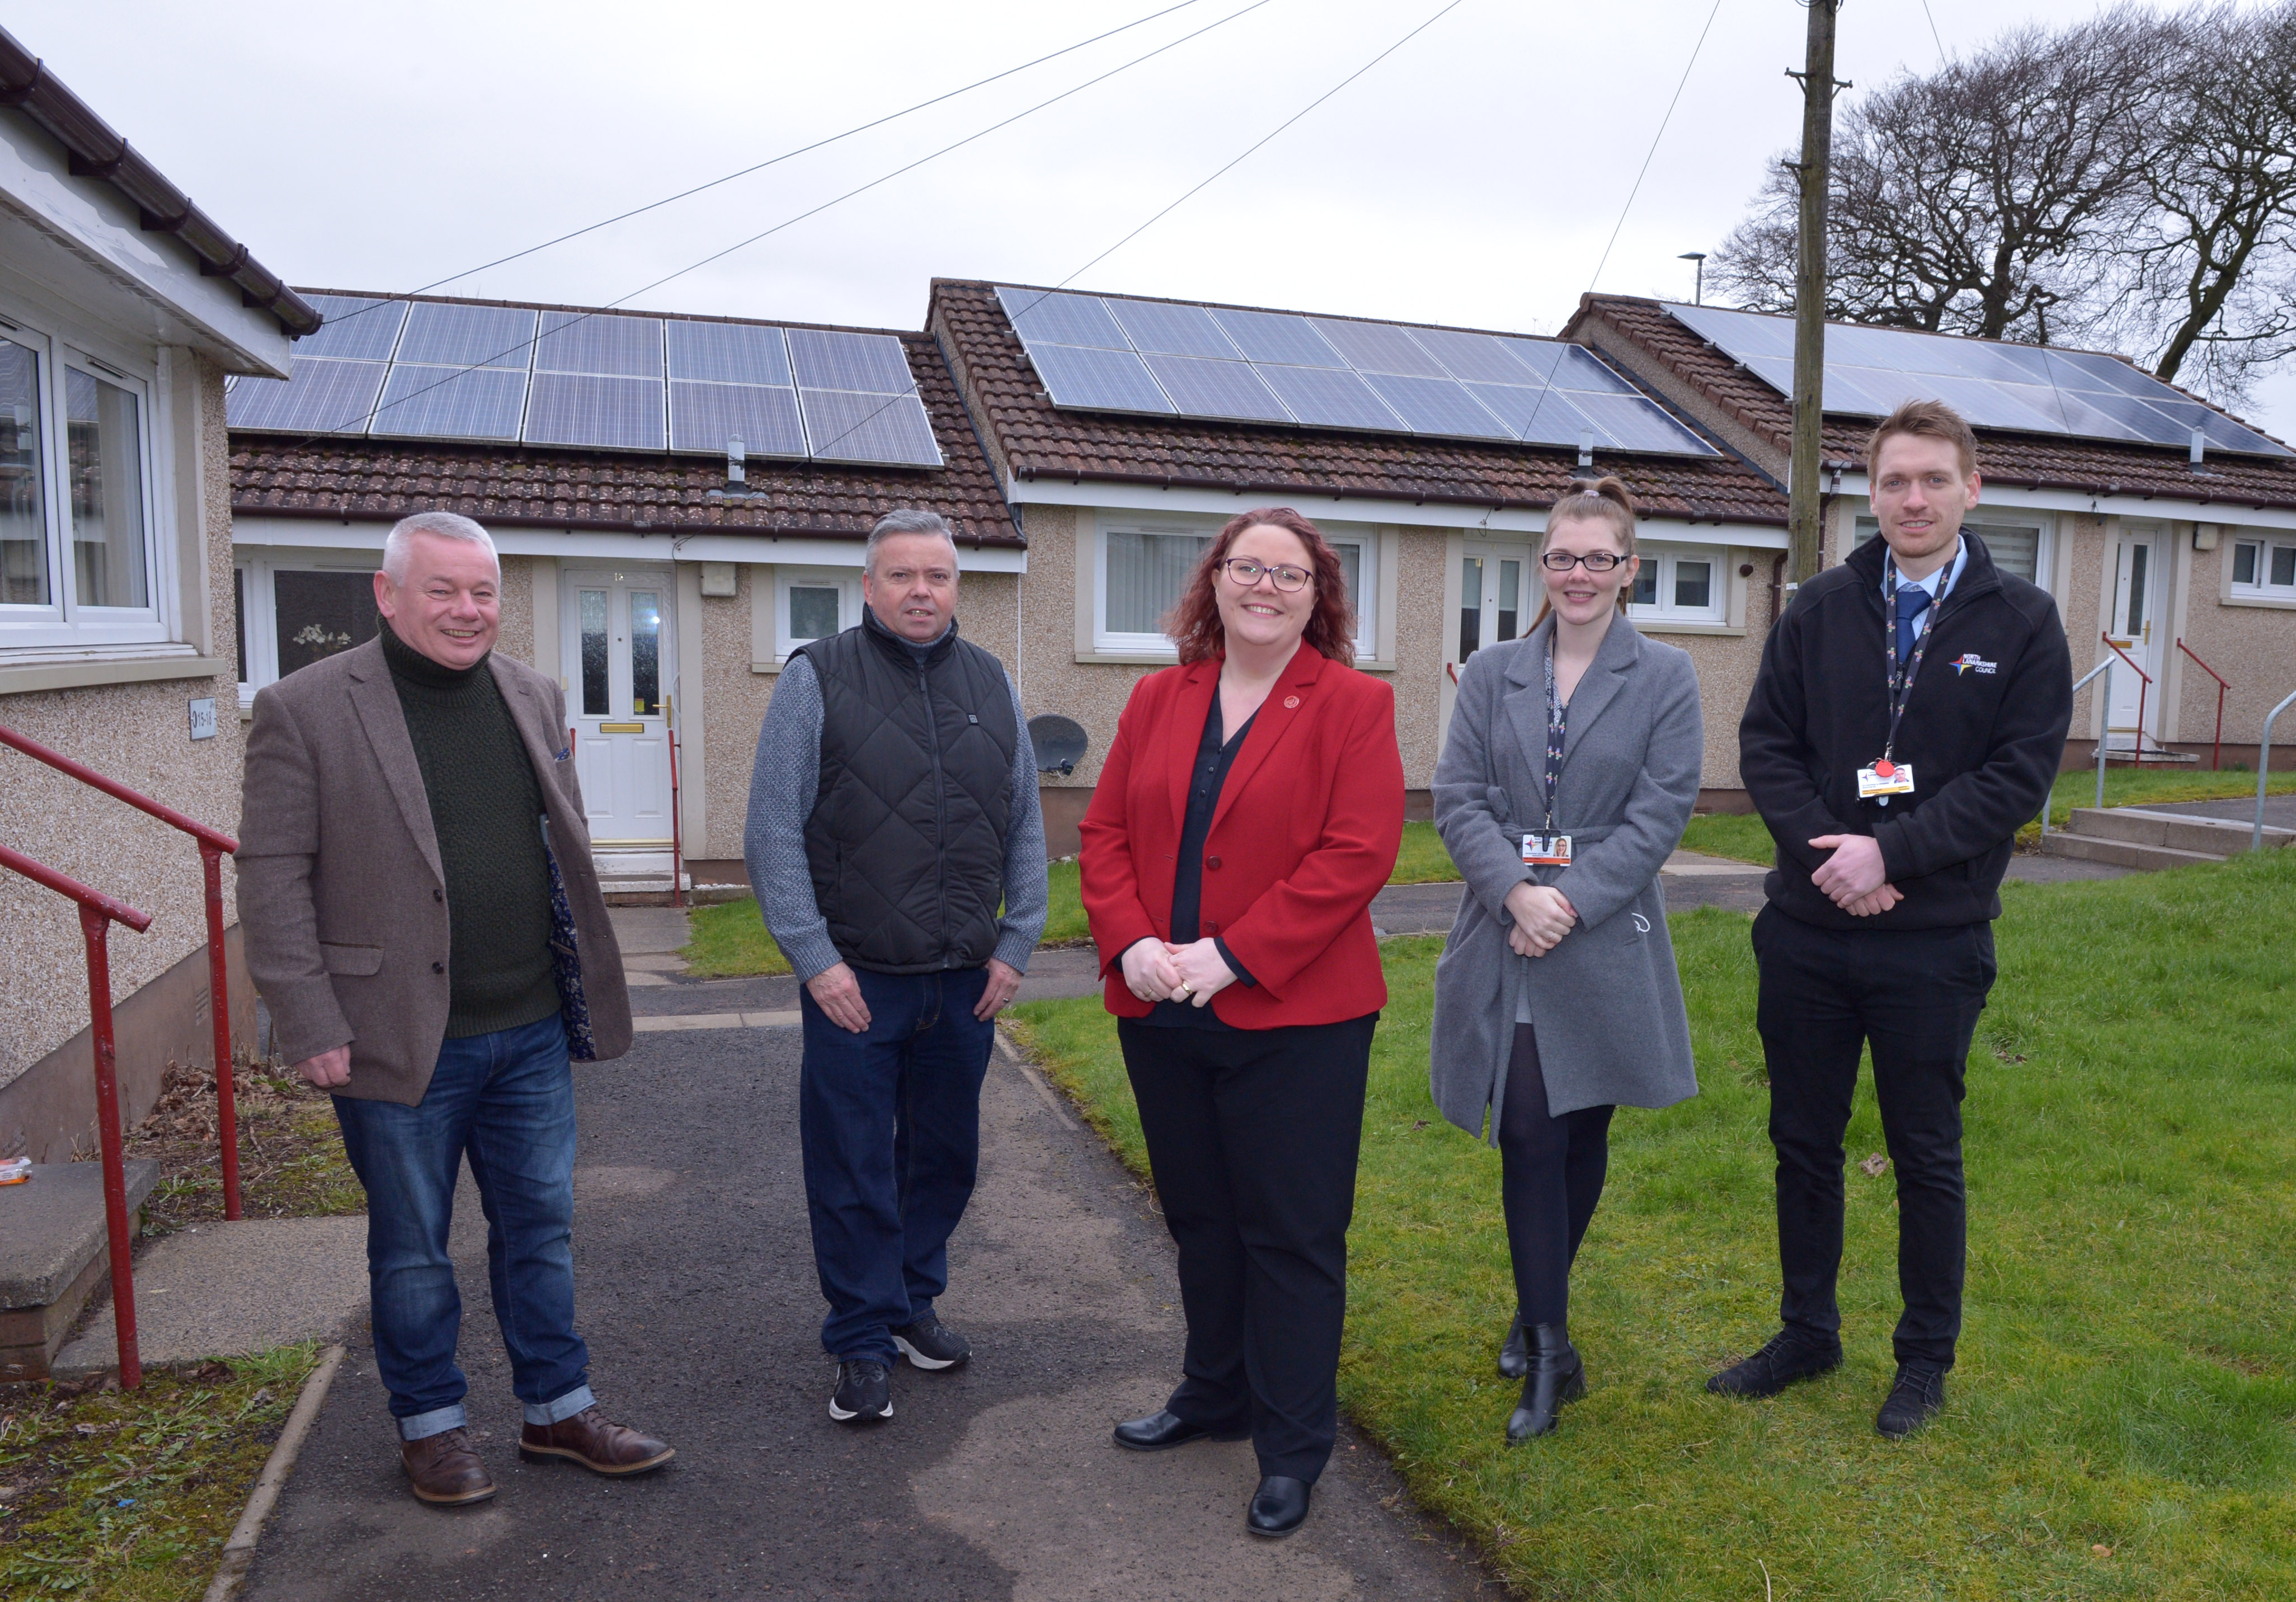 North Lanarkshire Council invests in renewable heating systems